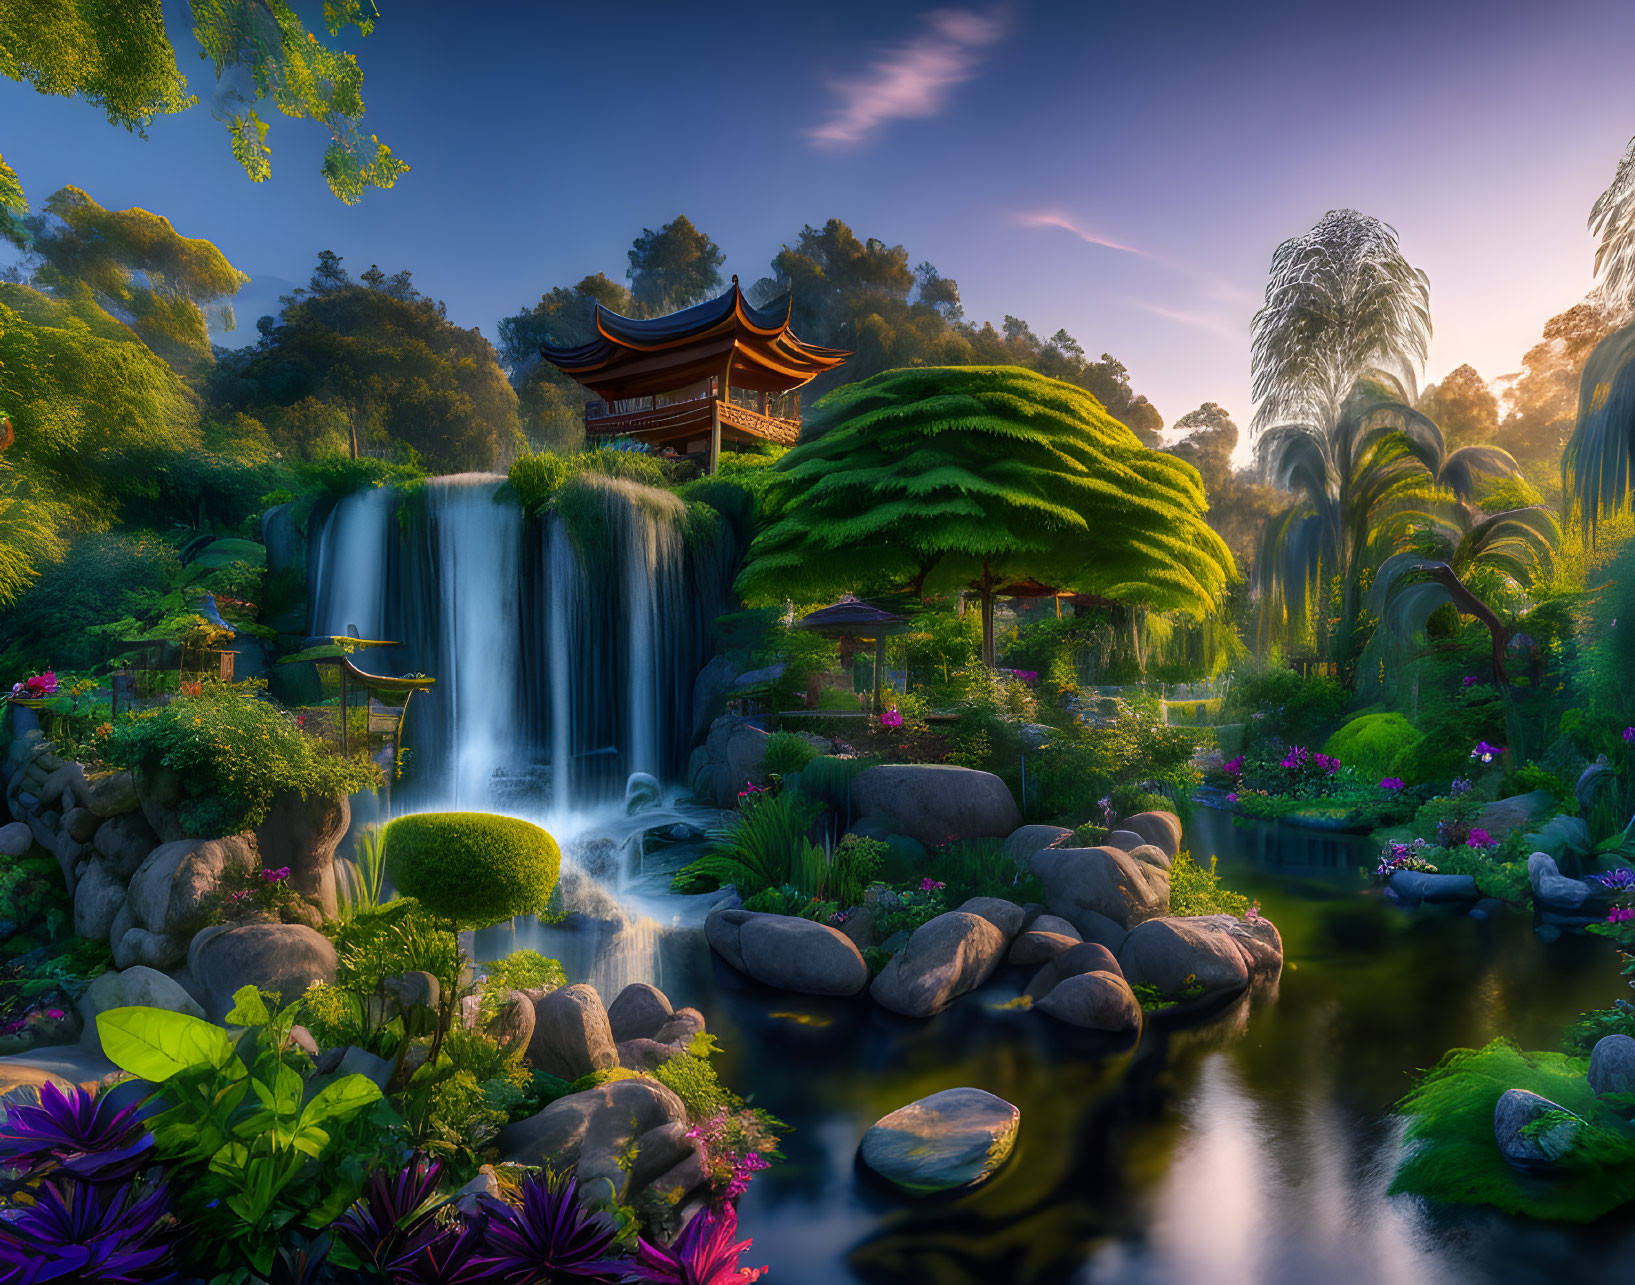 Tranquil Asian Garden with Waterfall, Pagoda, and Pond at Sunset